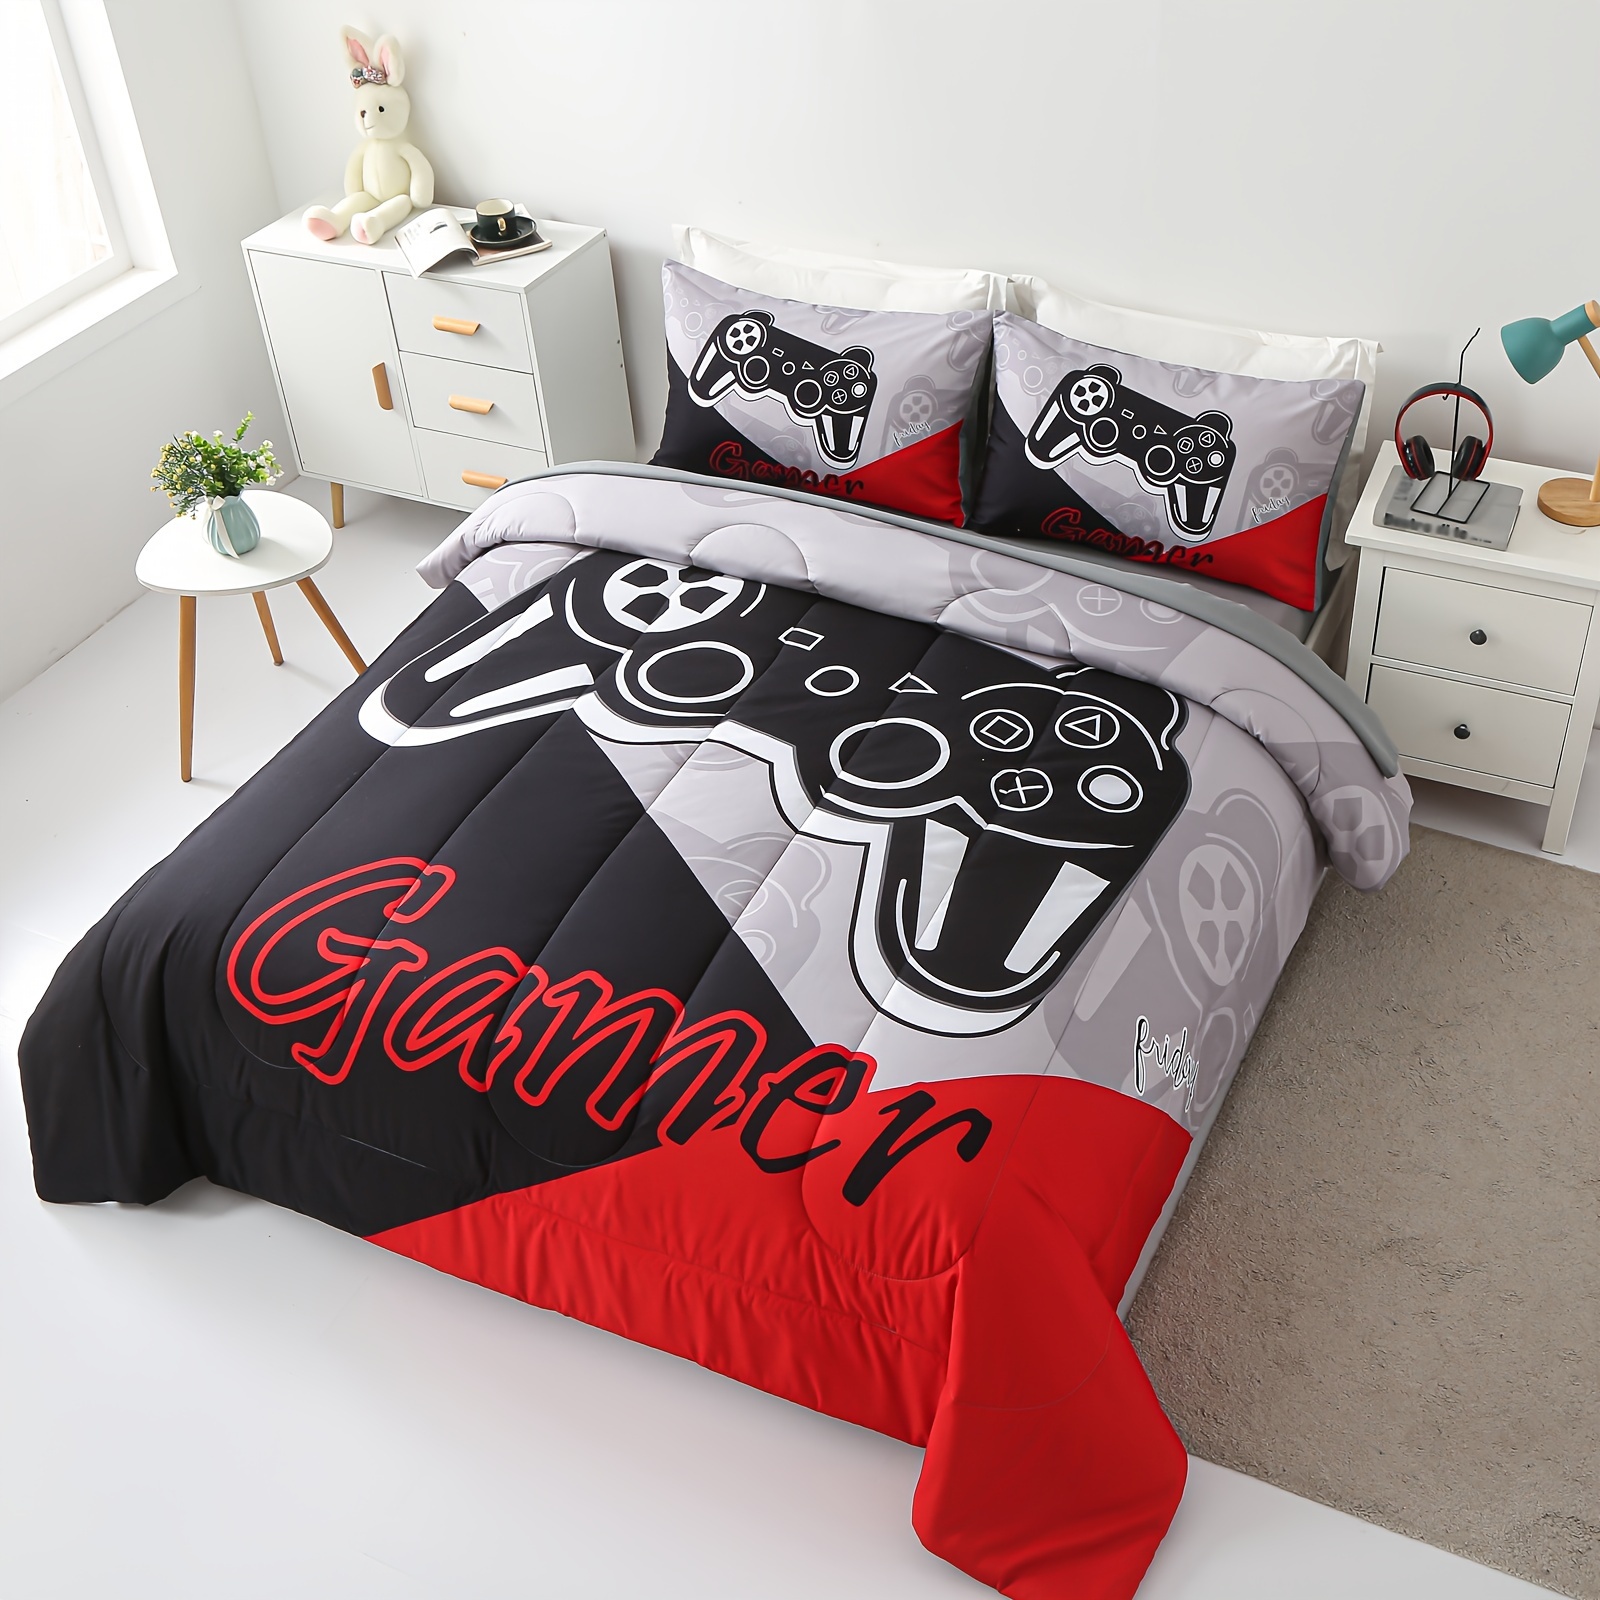 

4/5pcs Gamer Comforter Set - Stain Resistant, Ultra Soft Microfiber, Lightweight, 3d Colorful Game Controller Bedding With 100% Polyester Fiber Fill - Twin/full/queen Size Bed In A Bag For All Seasons